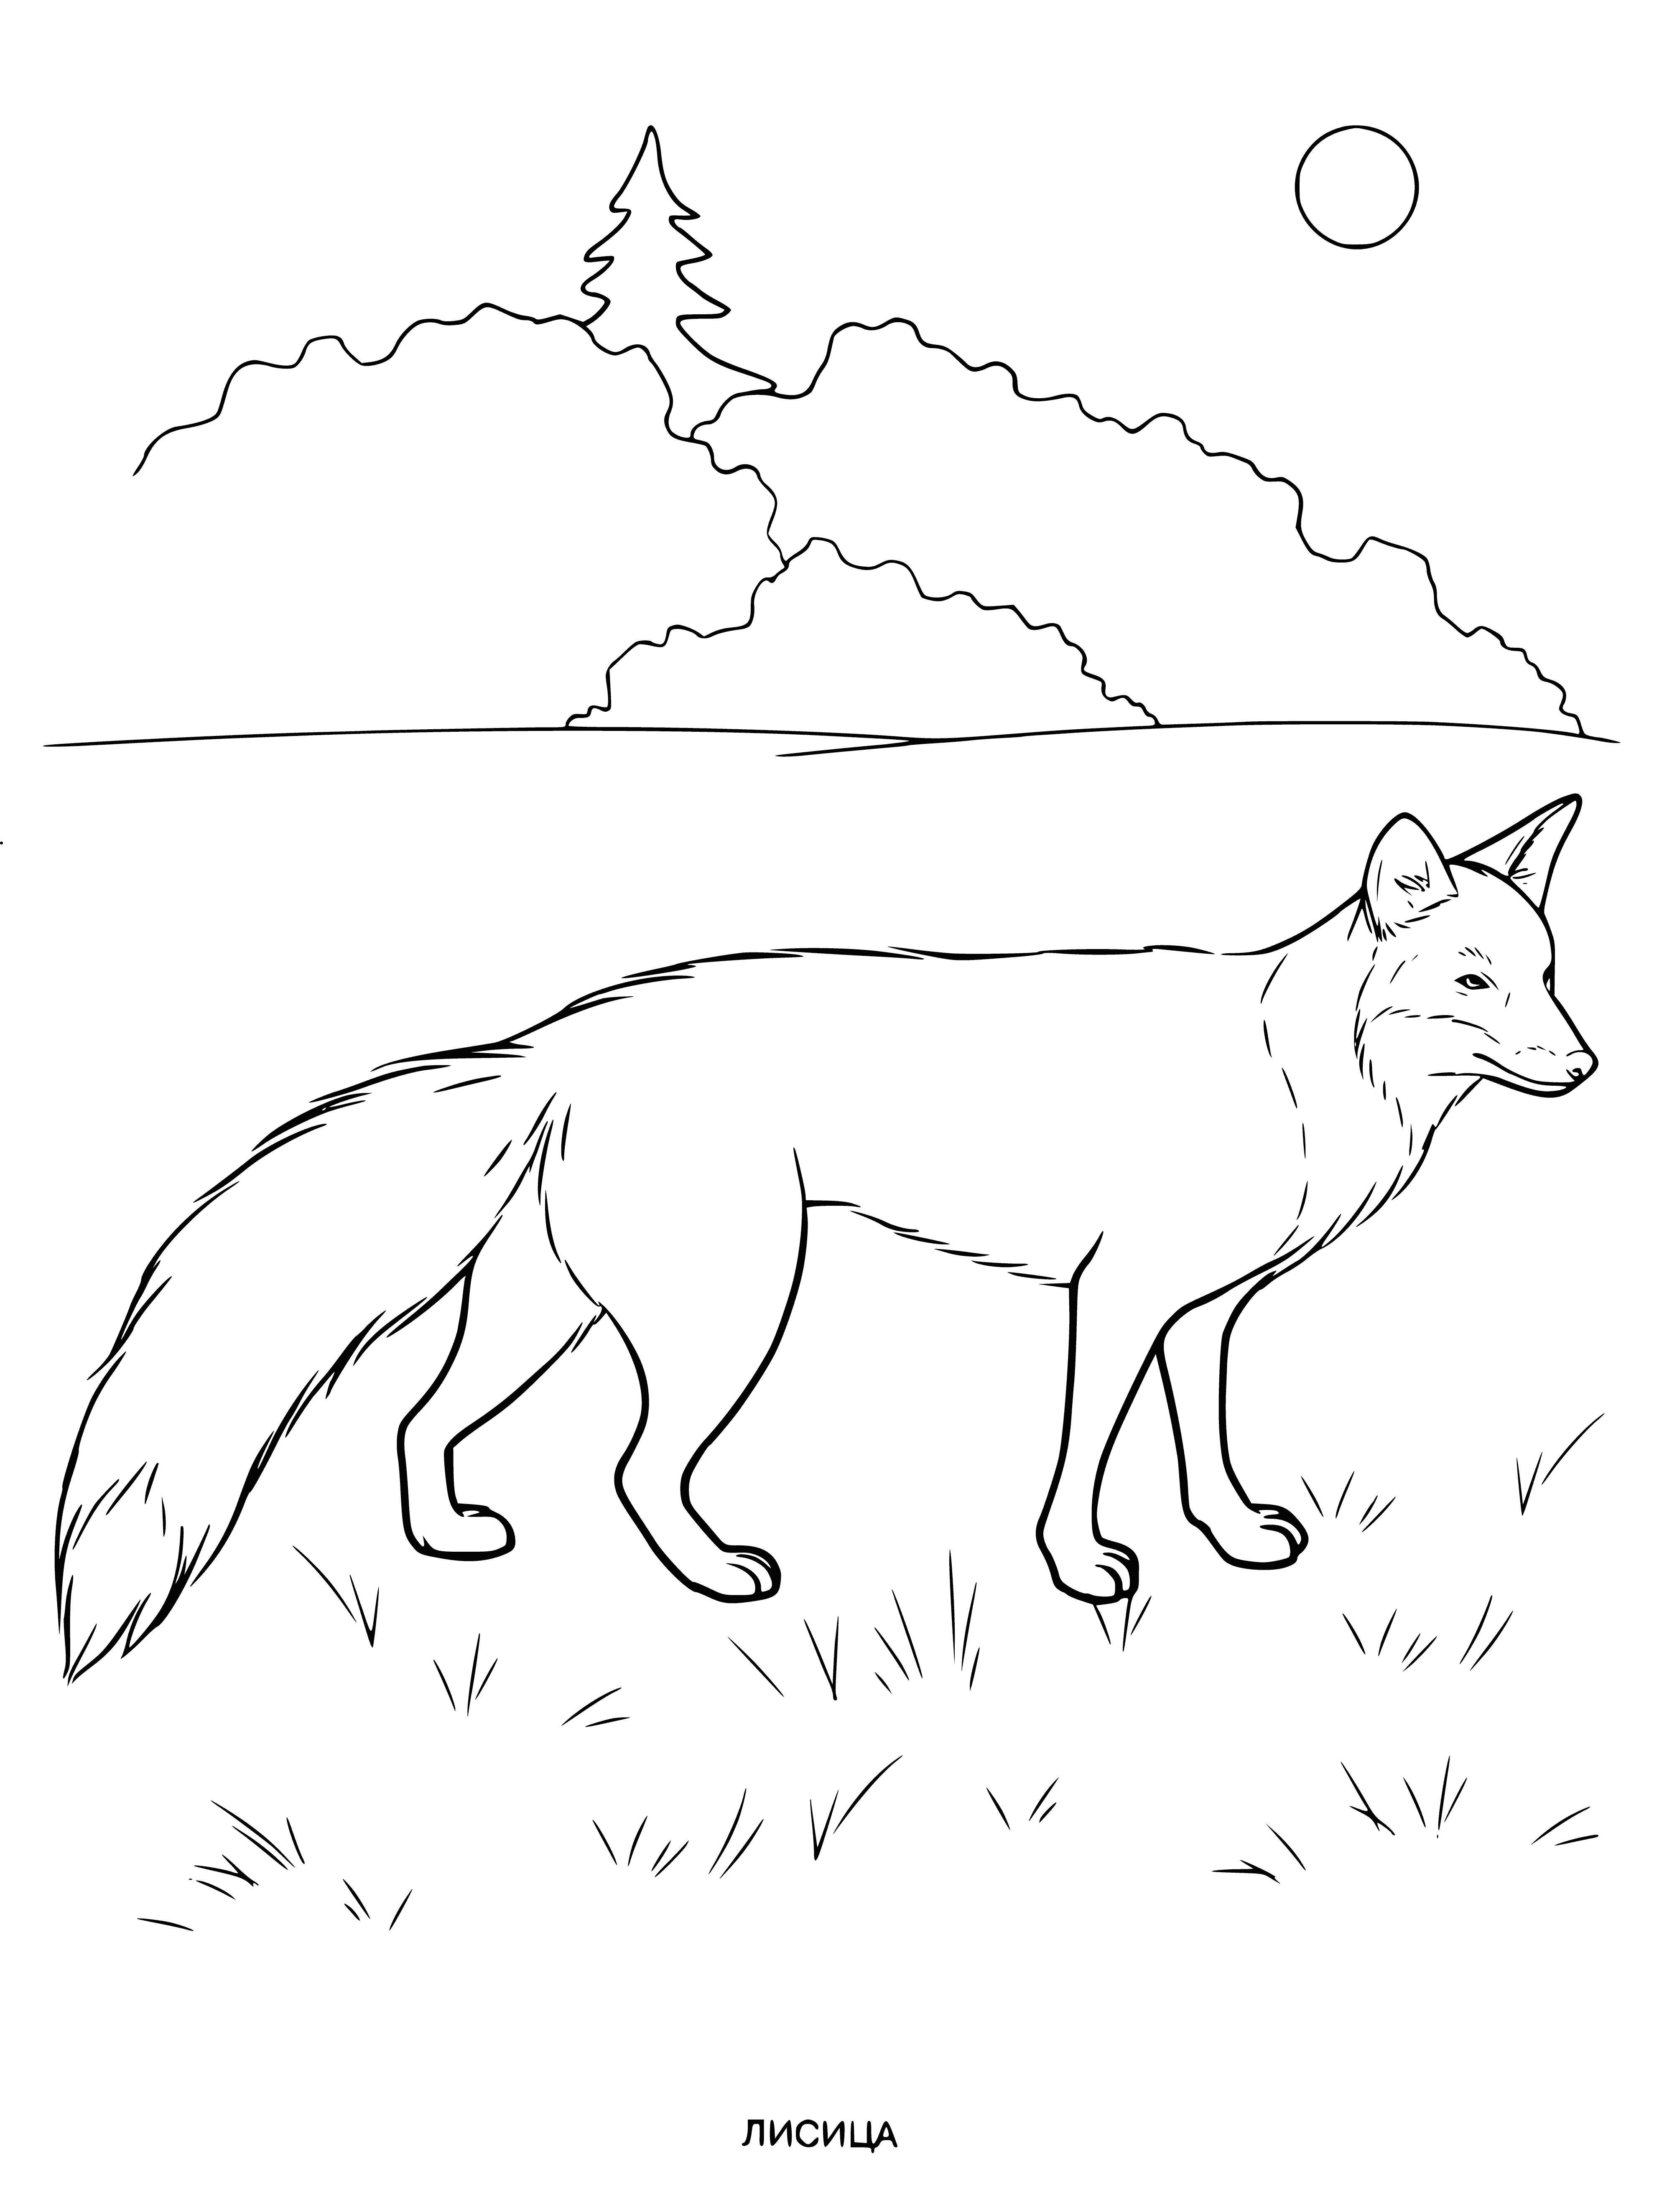 coloring page: A fox sits beside a stream with its bushy tail and pointy ears open, looking at the camera.